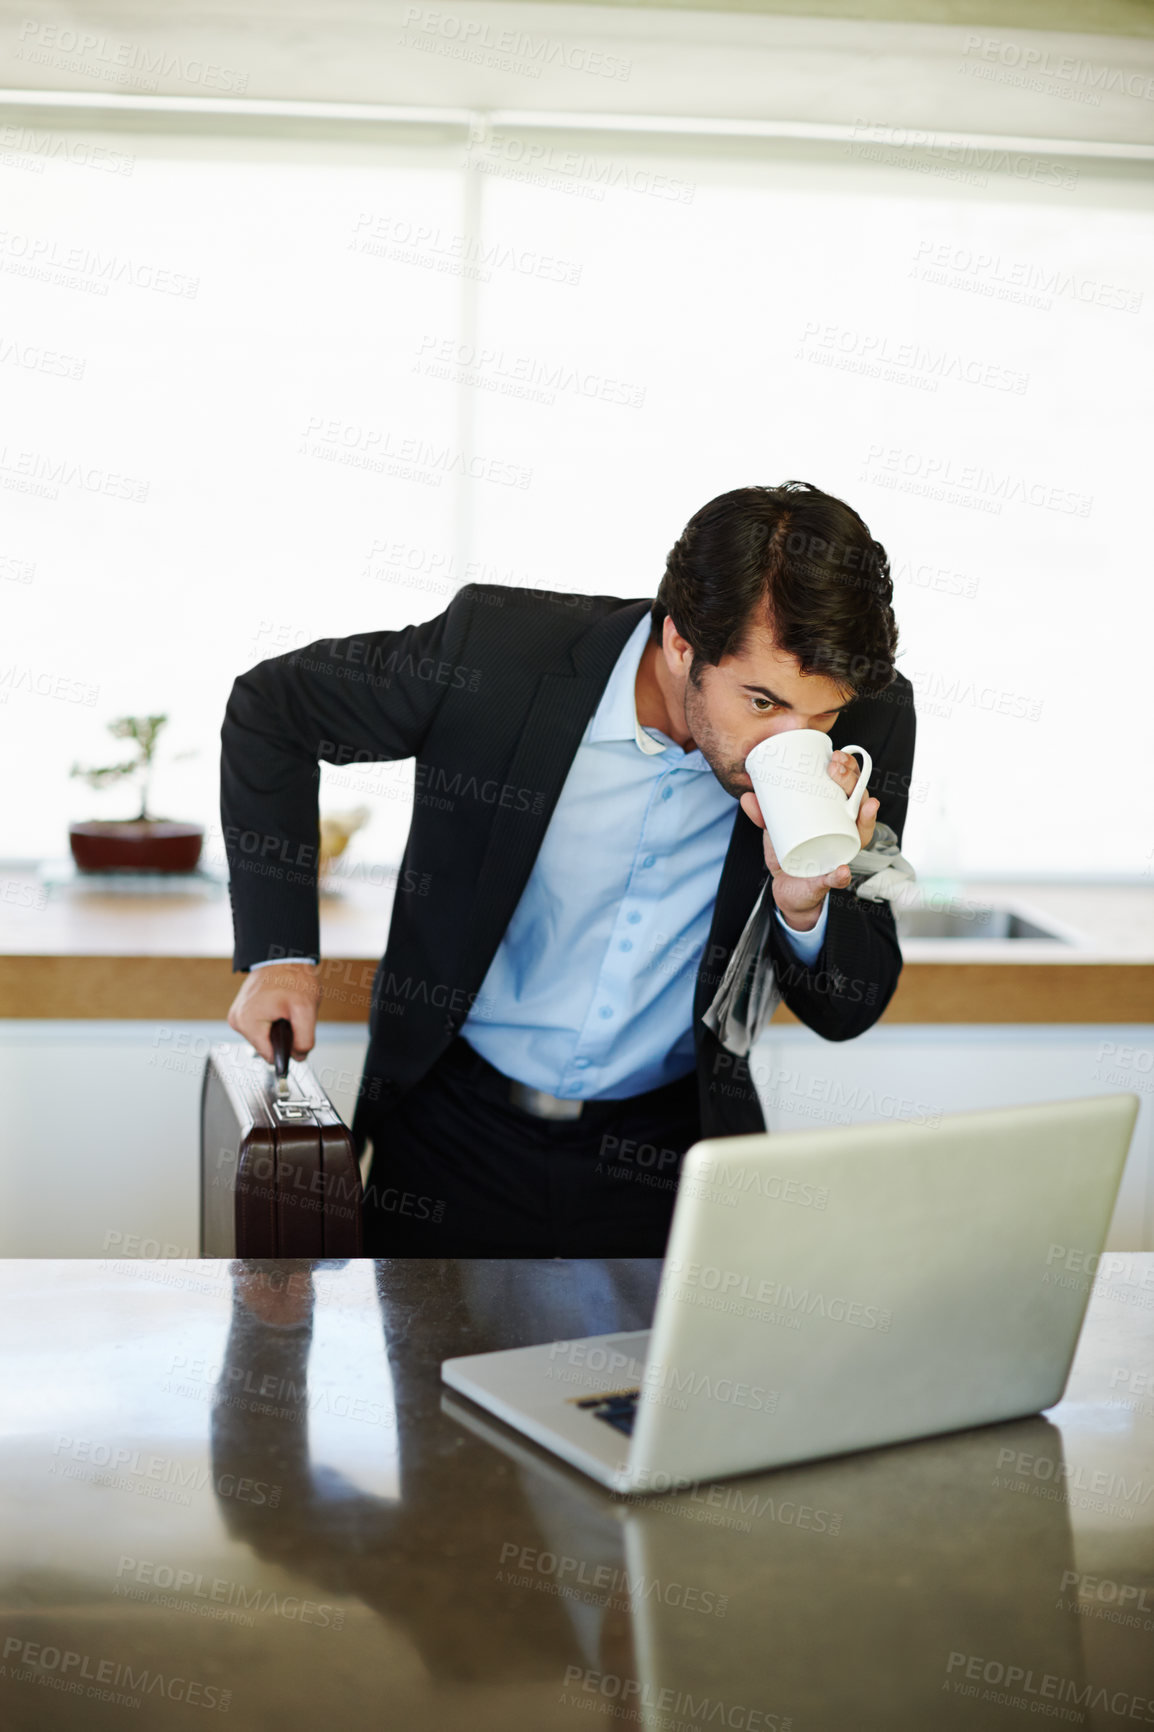 Buy stock photo Shot of a rushed businessman drinking coffee and using his laptop in his kitchen 